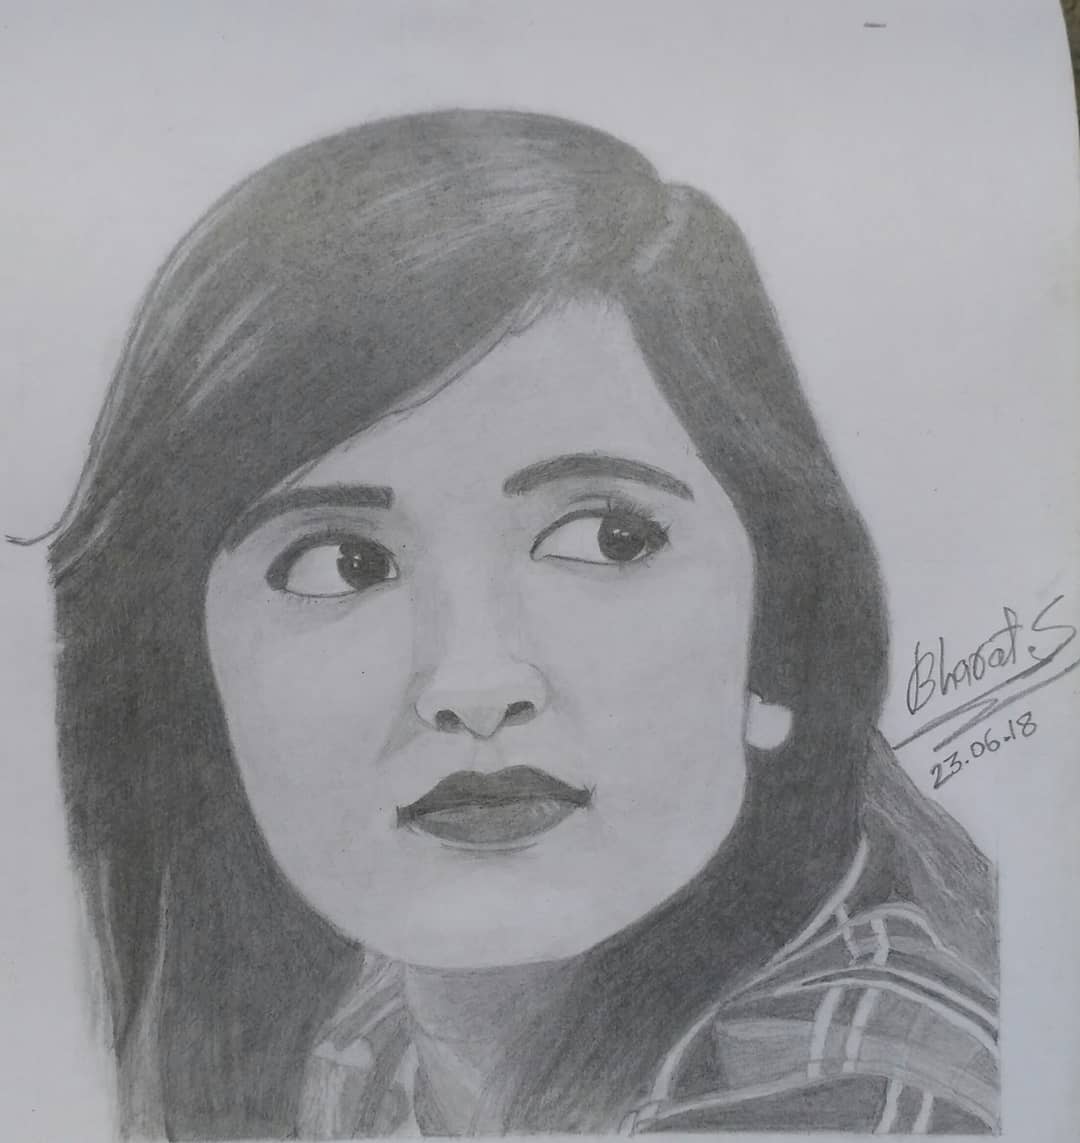 This sketch is made by @shakyaartsHope you like it  @ShirleySetia Please check this thread for some awesome arts... https://www.instagram.com/p/BkiQTXMnSNM/?igshid=14ek7ividgipg